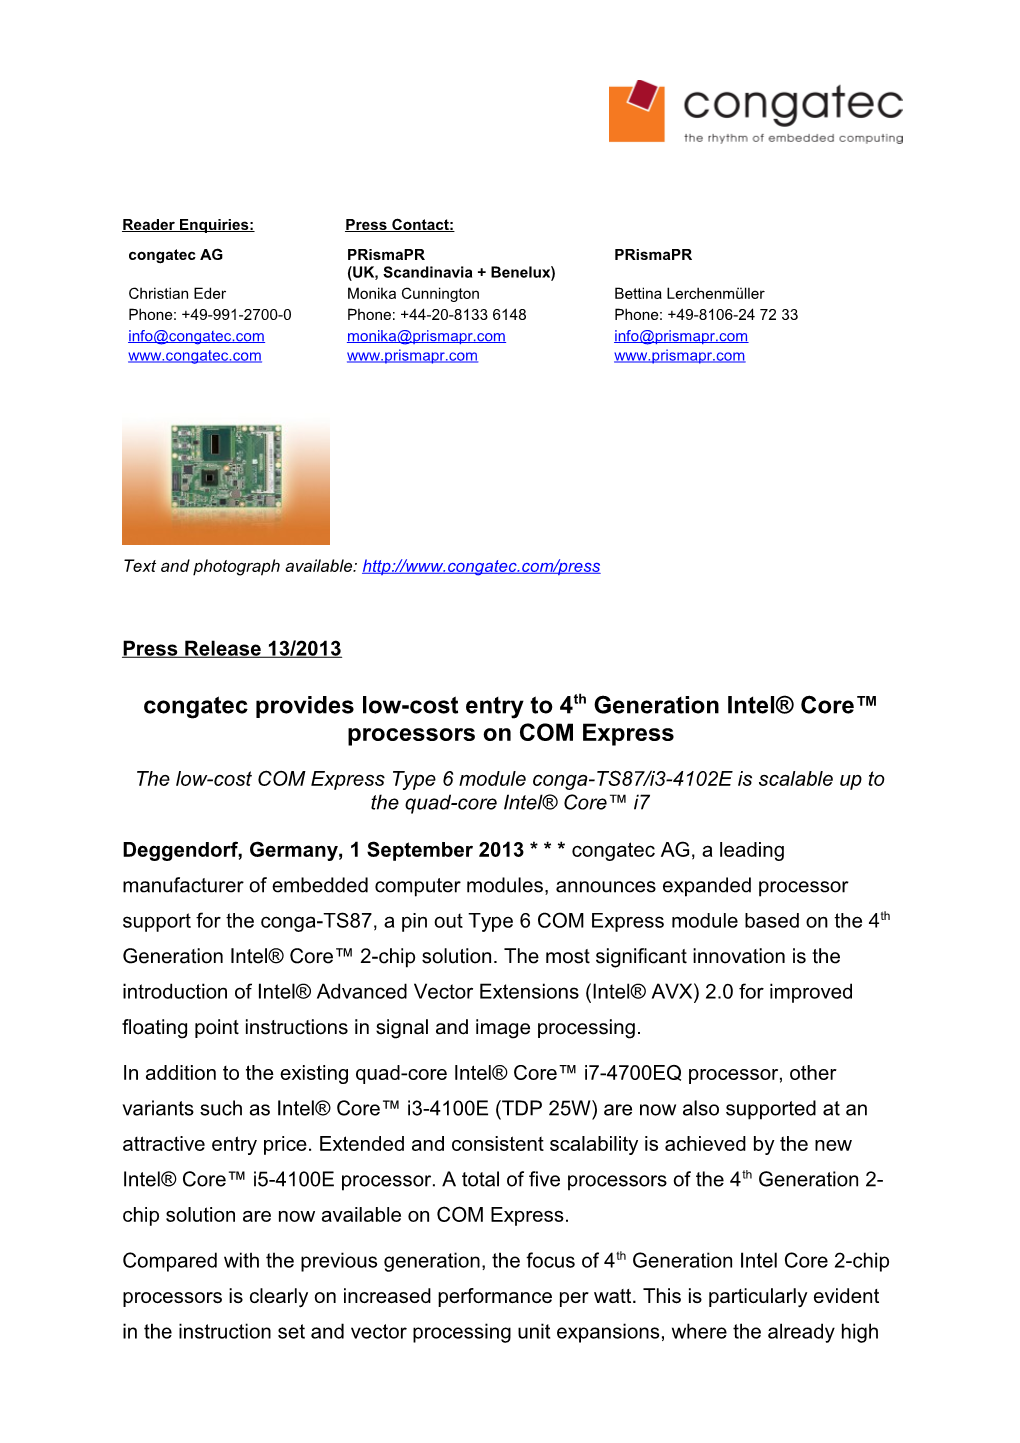 Congatec Expands Processor Support of COM Express Basic Module for 4Th Generation Intel